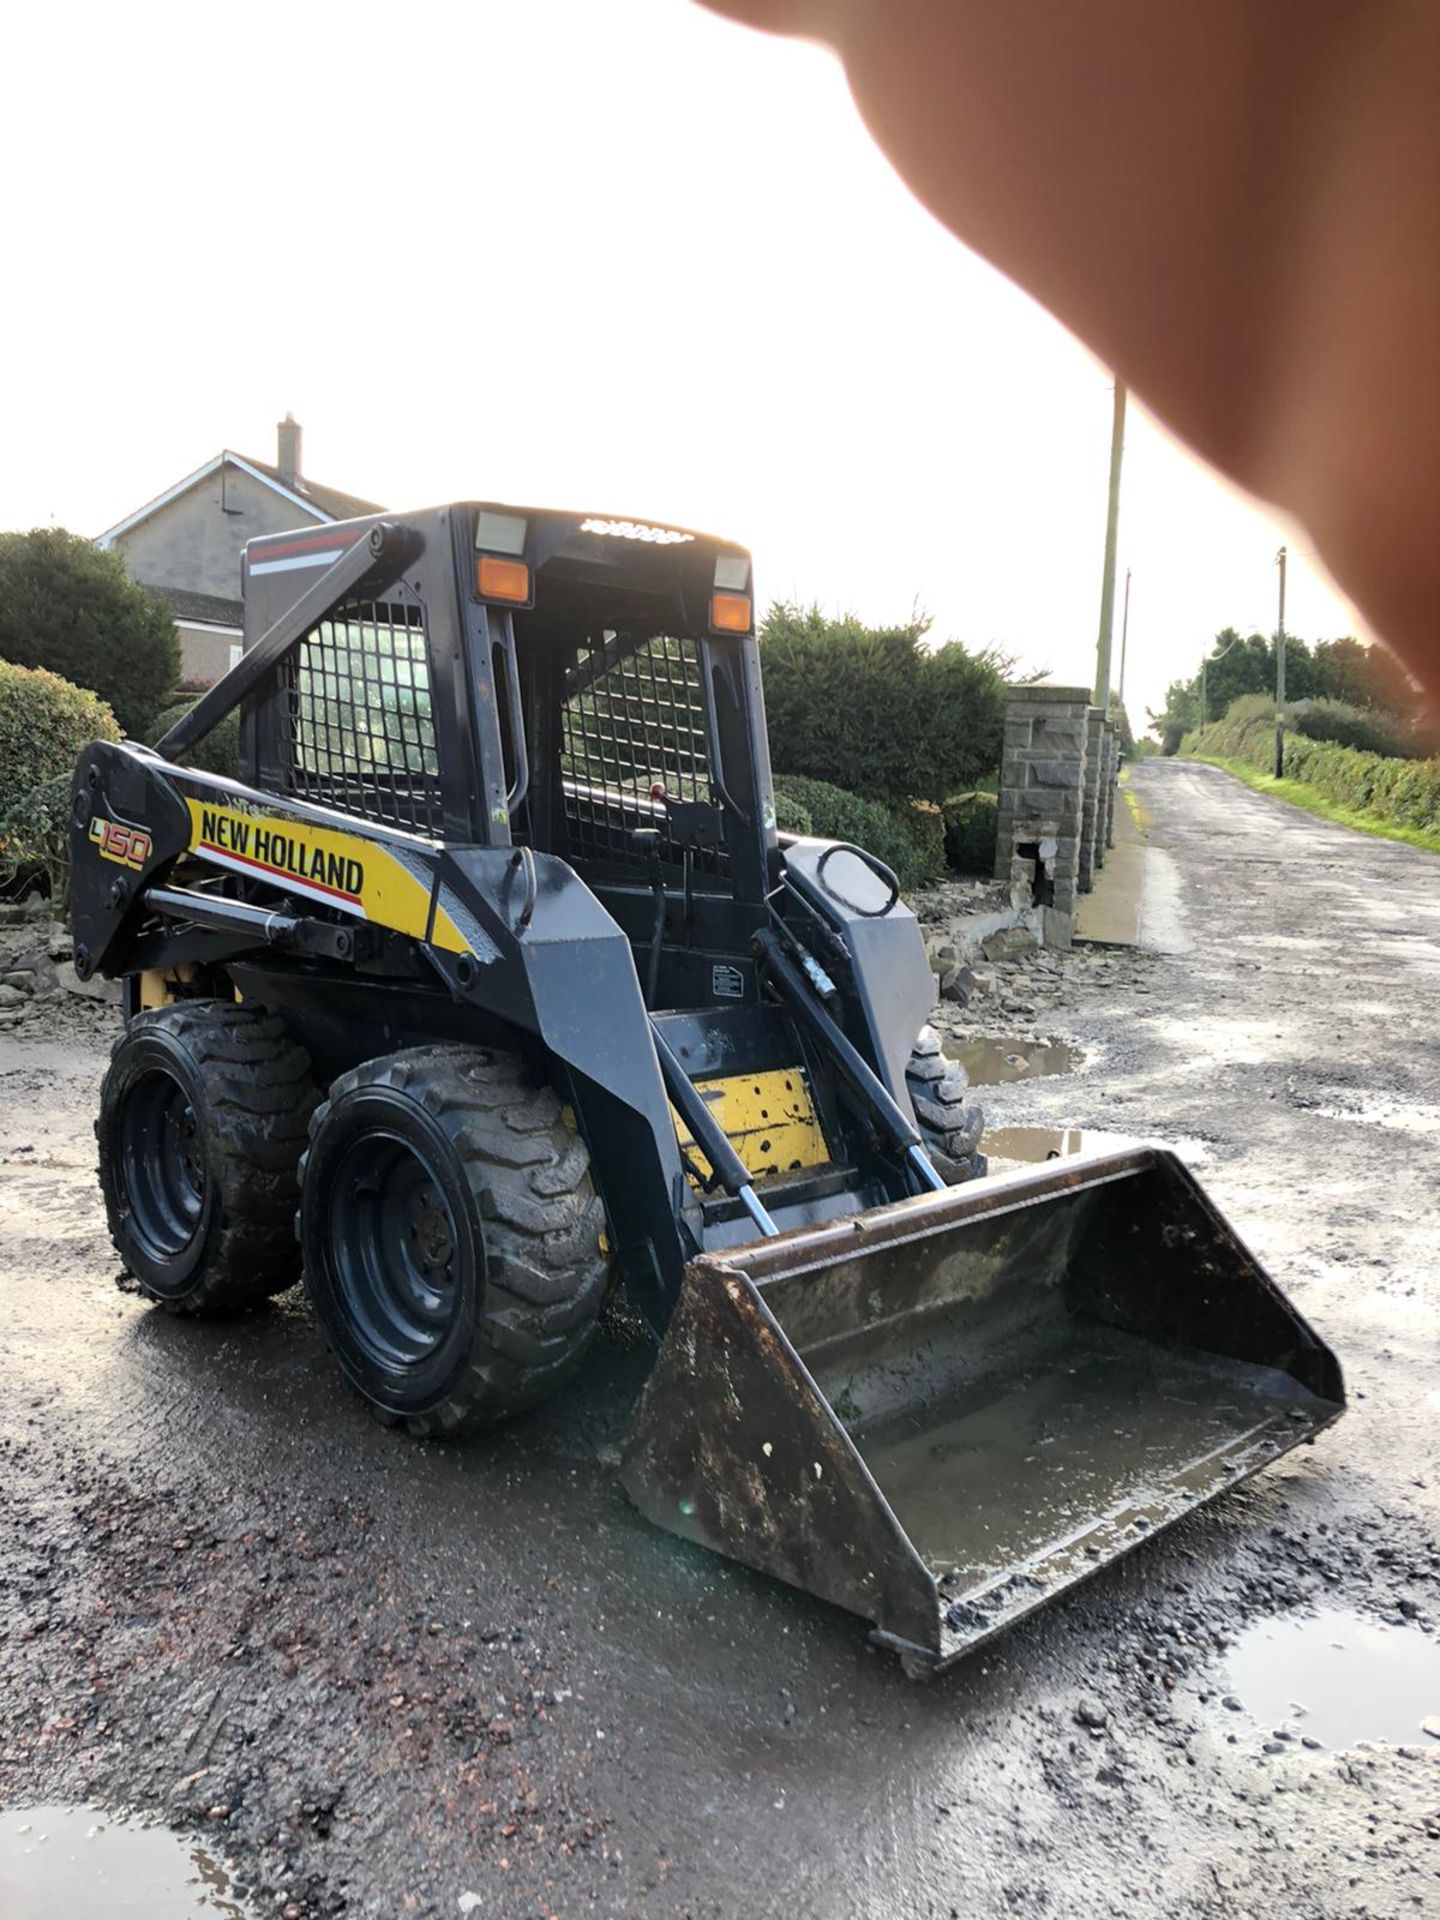 NEW HOLLAND L150 SKID STEER LOADER 4WD WITH BUCKET, RUNS, WORKS AND LIFTS *PLUS VAT* - Image 2 of 6